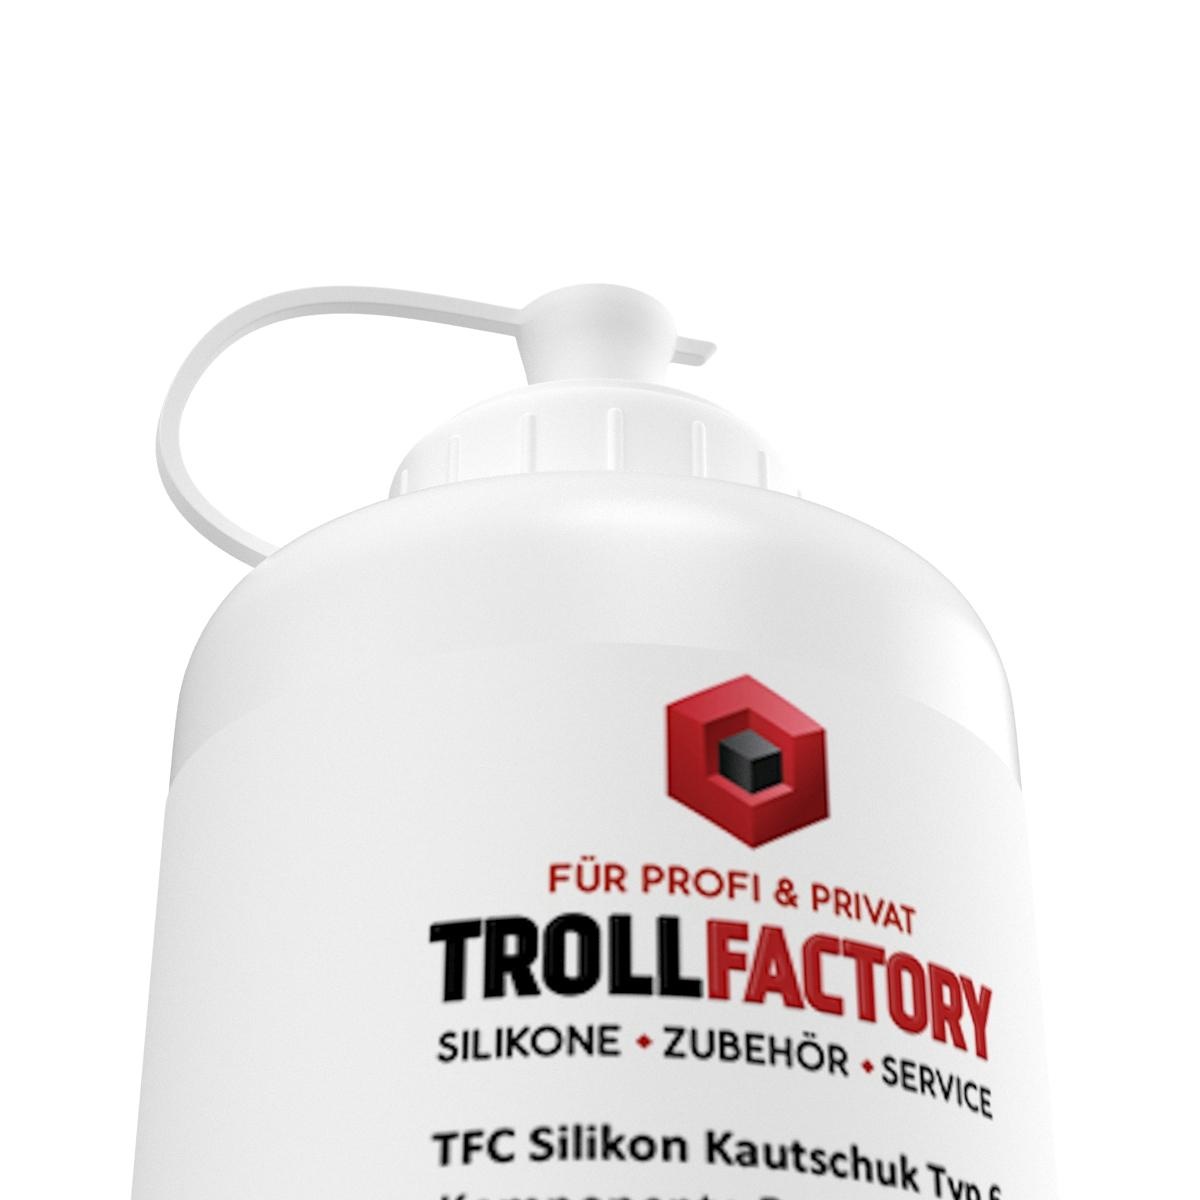 Troll Factory TFC Troll Factory Silicone Rubber Type 6 Food 2000g